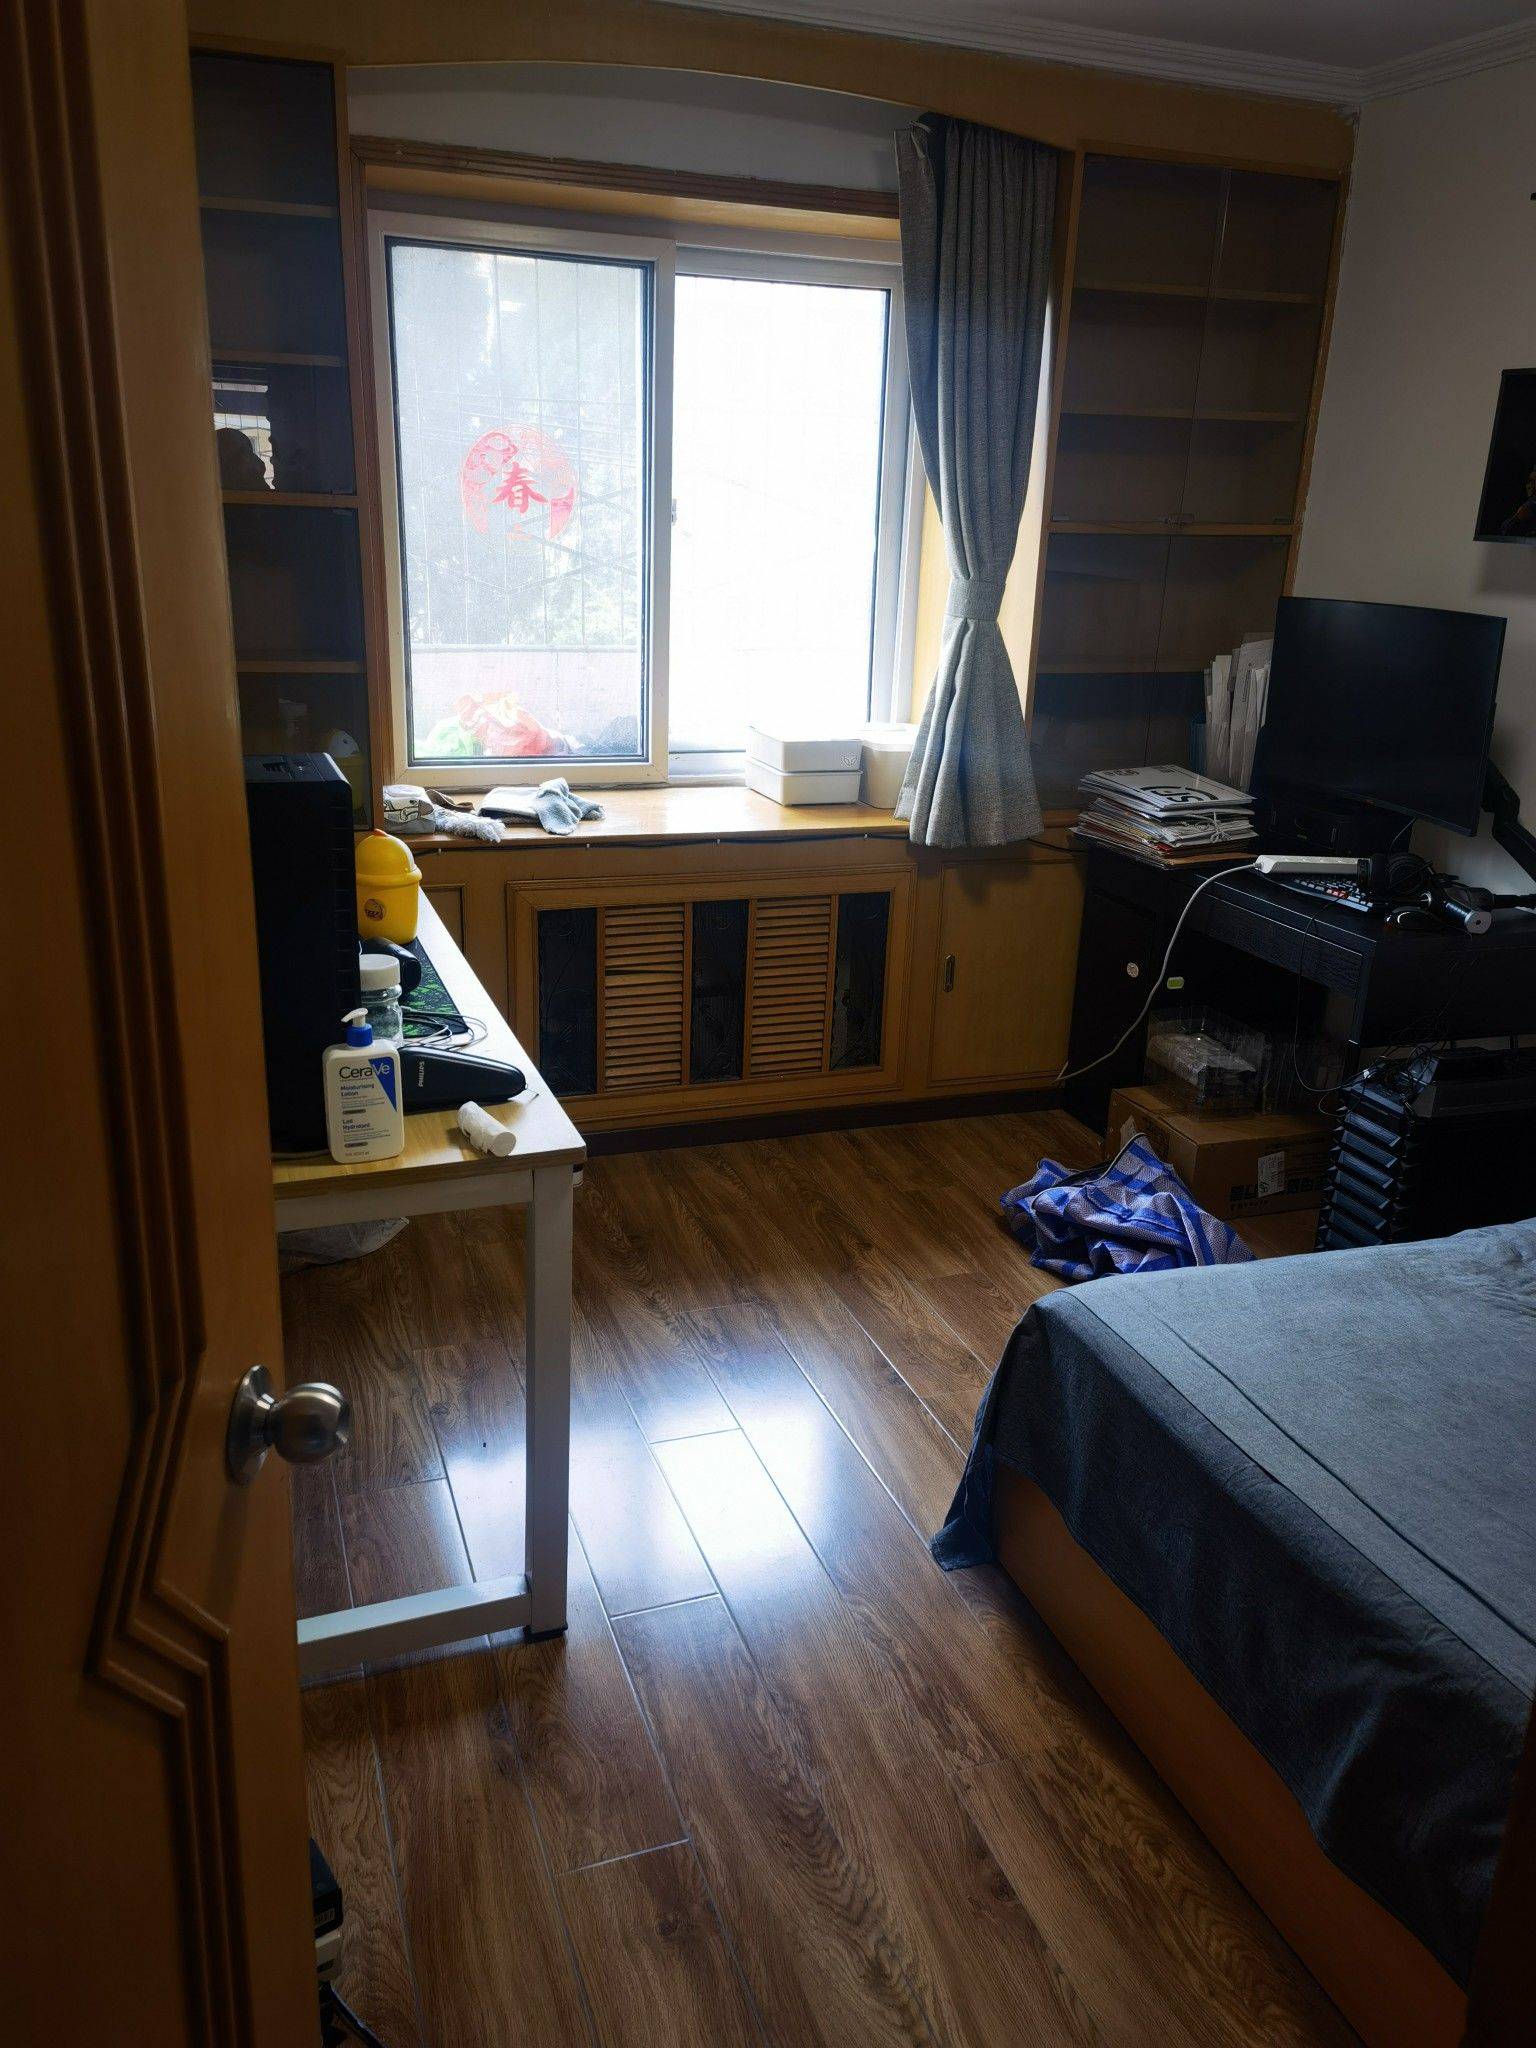 Beijing-Shijingshan-Cozy Home,Clean&Comfy,Chilled